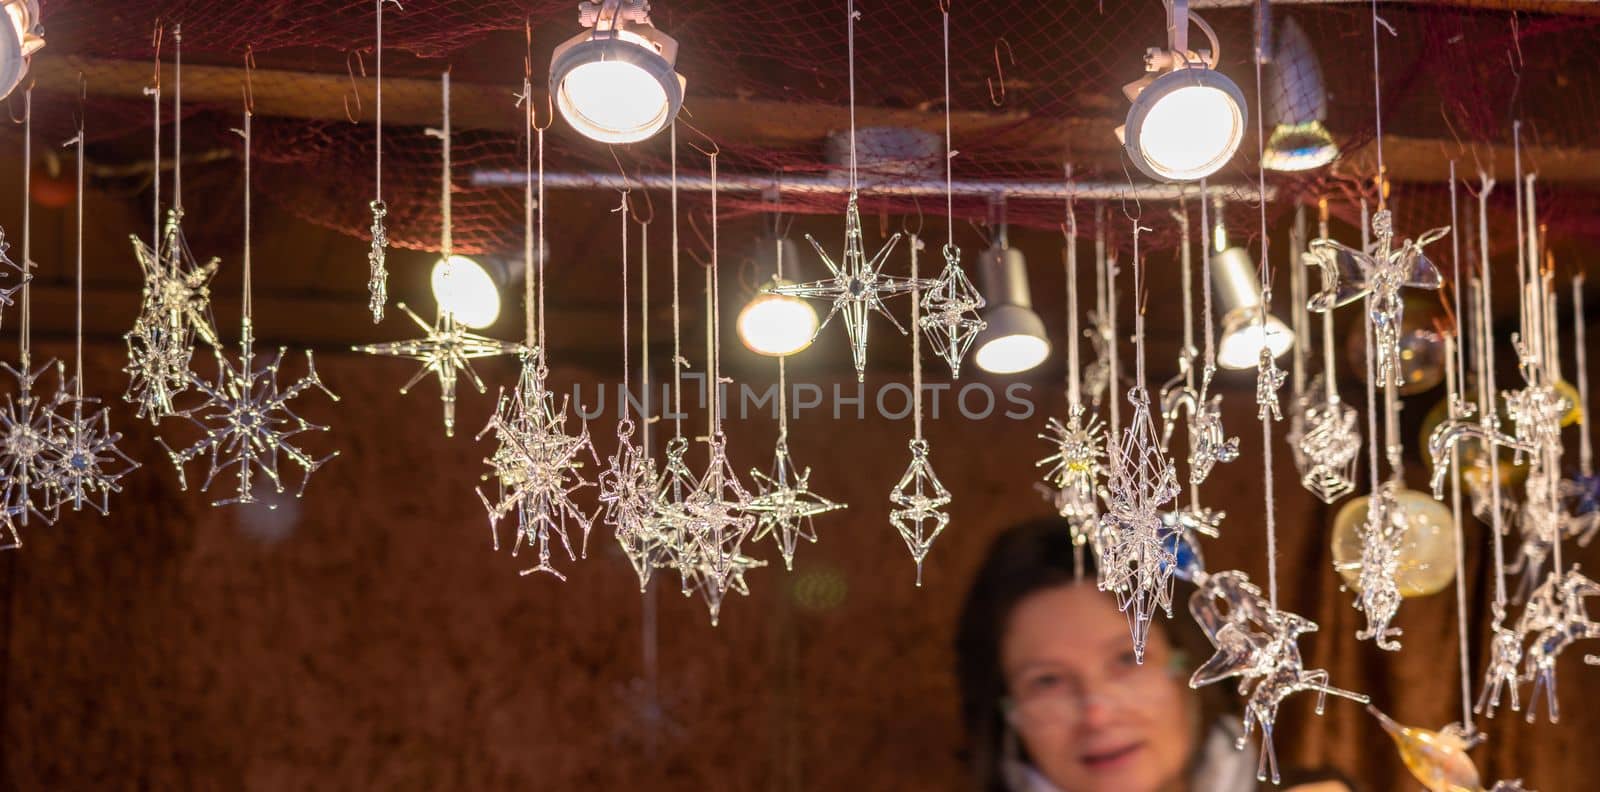 Christmas decorations in the form of glass snowflakes.